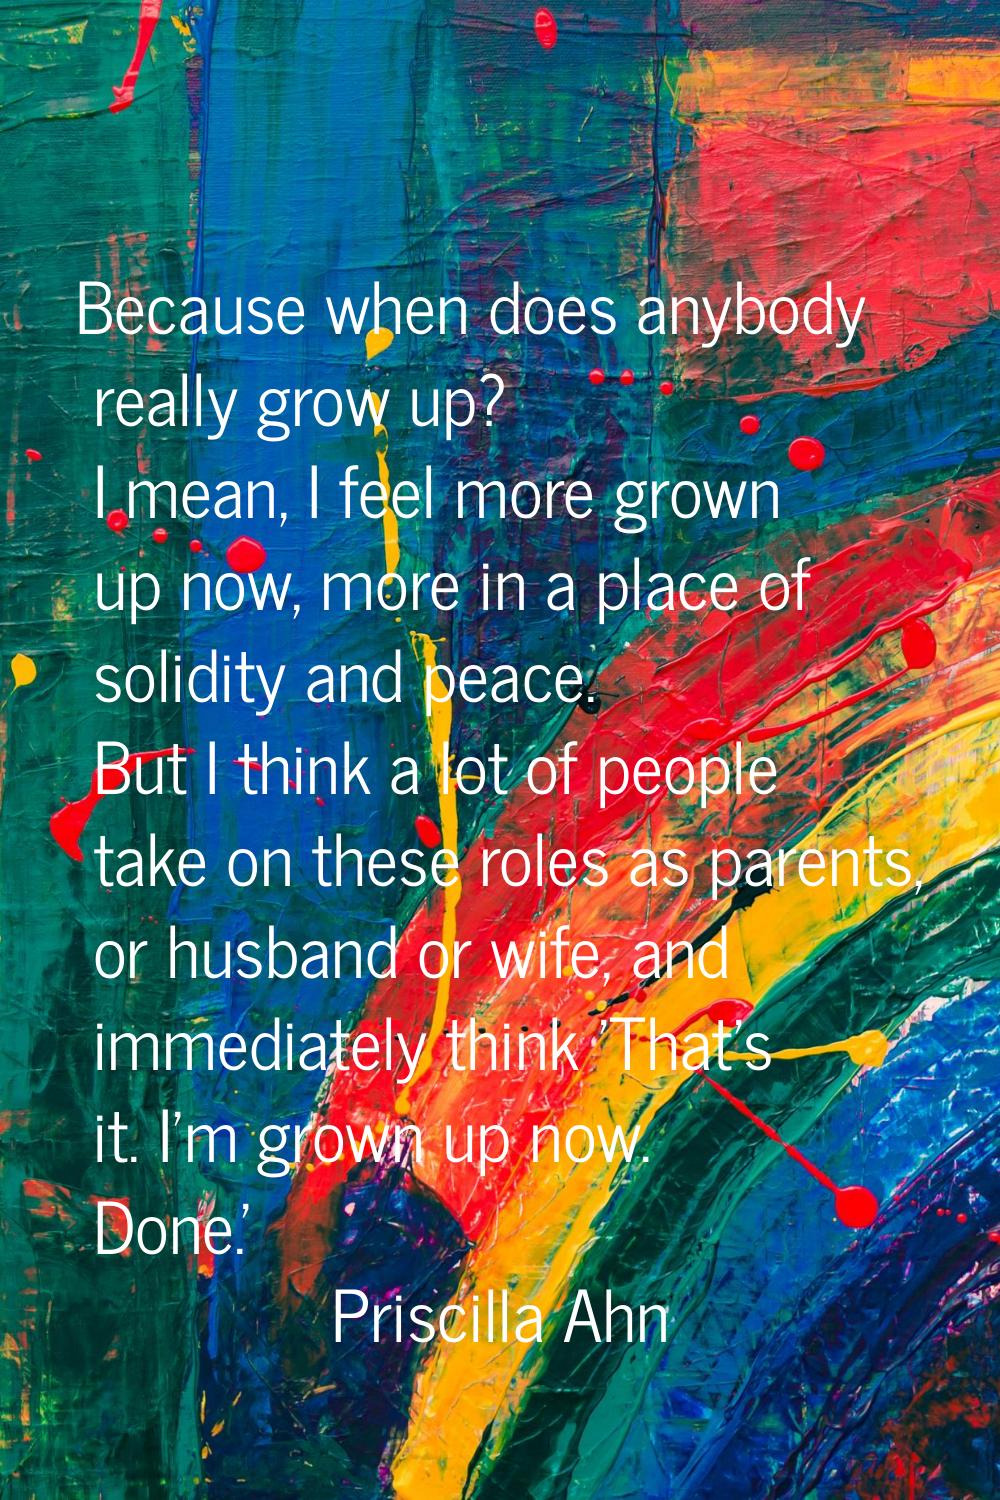 Because when does anybody really grow up? I mean, I feel more grown up now, more in a place of soli